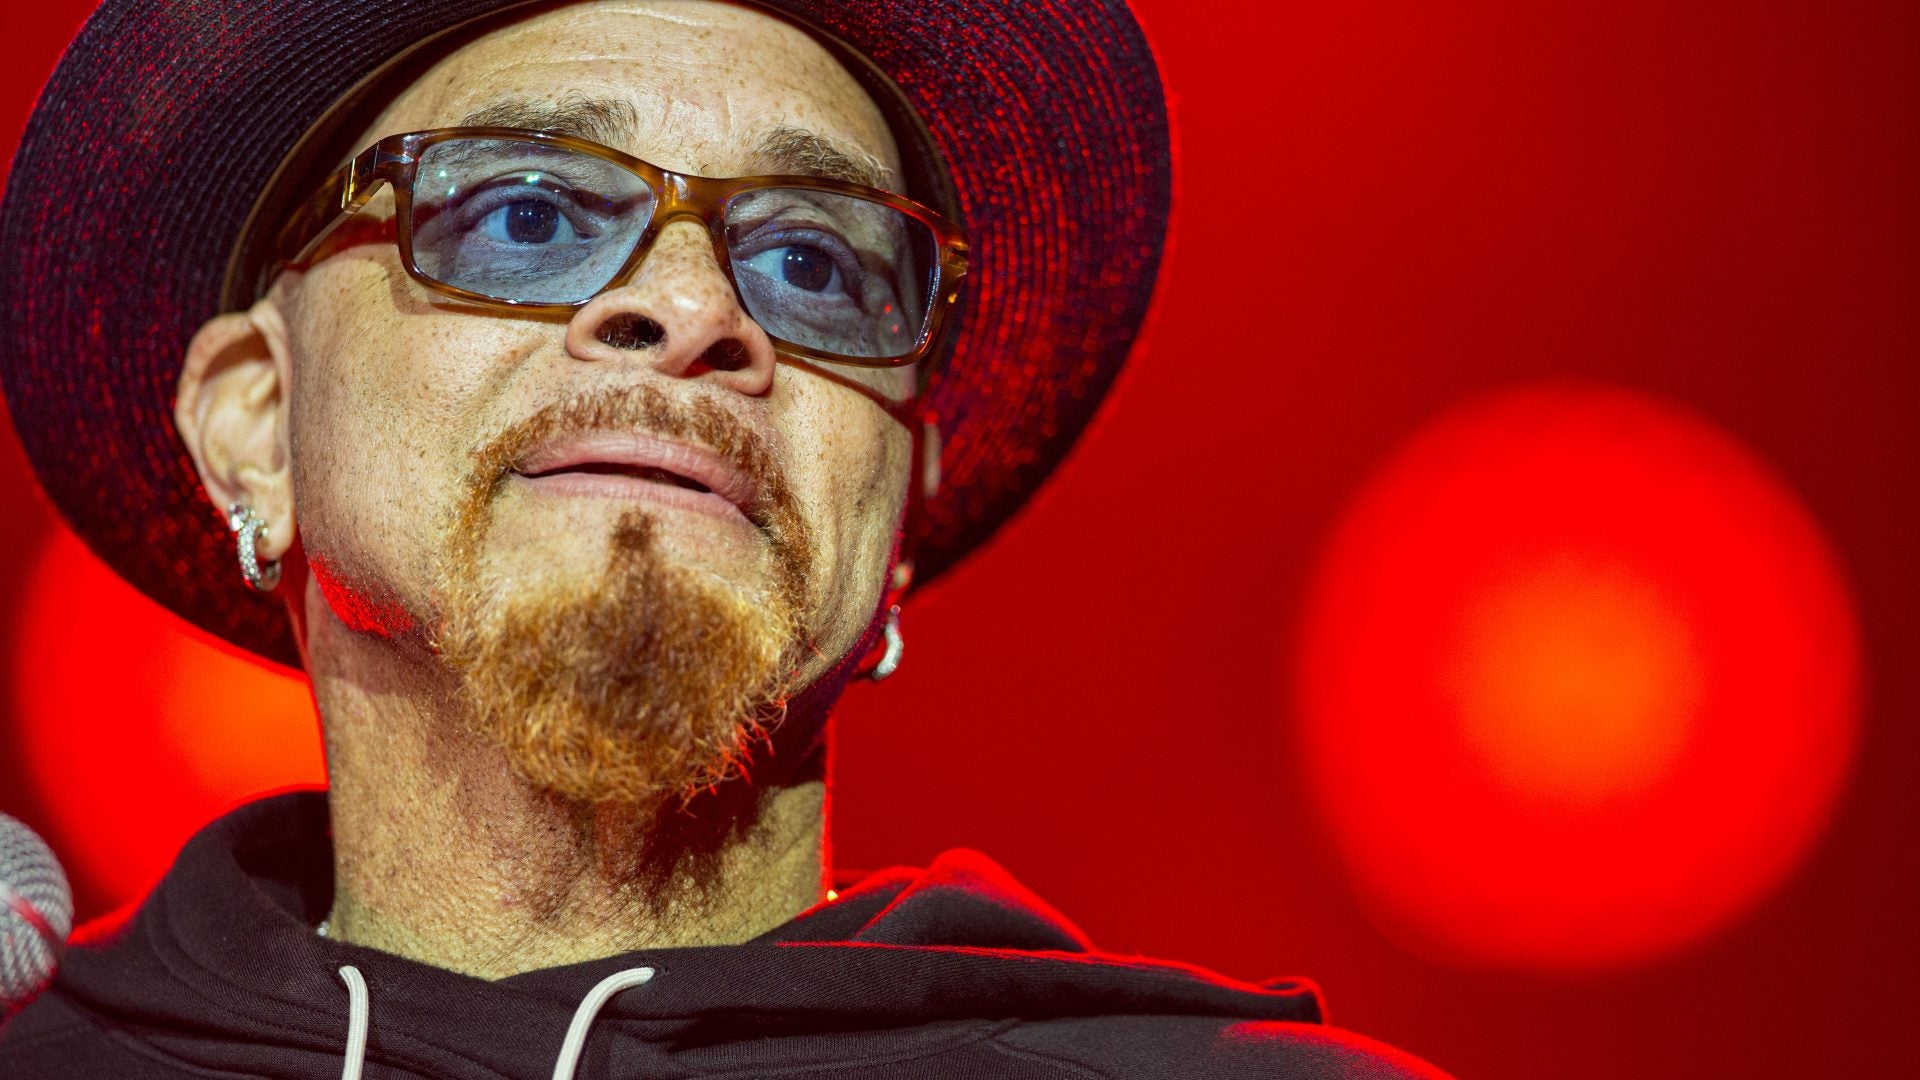 Sinbad Reveals He Suffered Ischemic Stroke, Currently Relearning To Walk